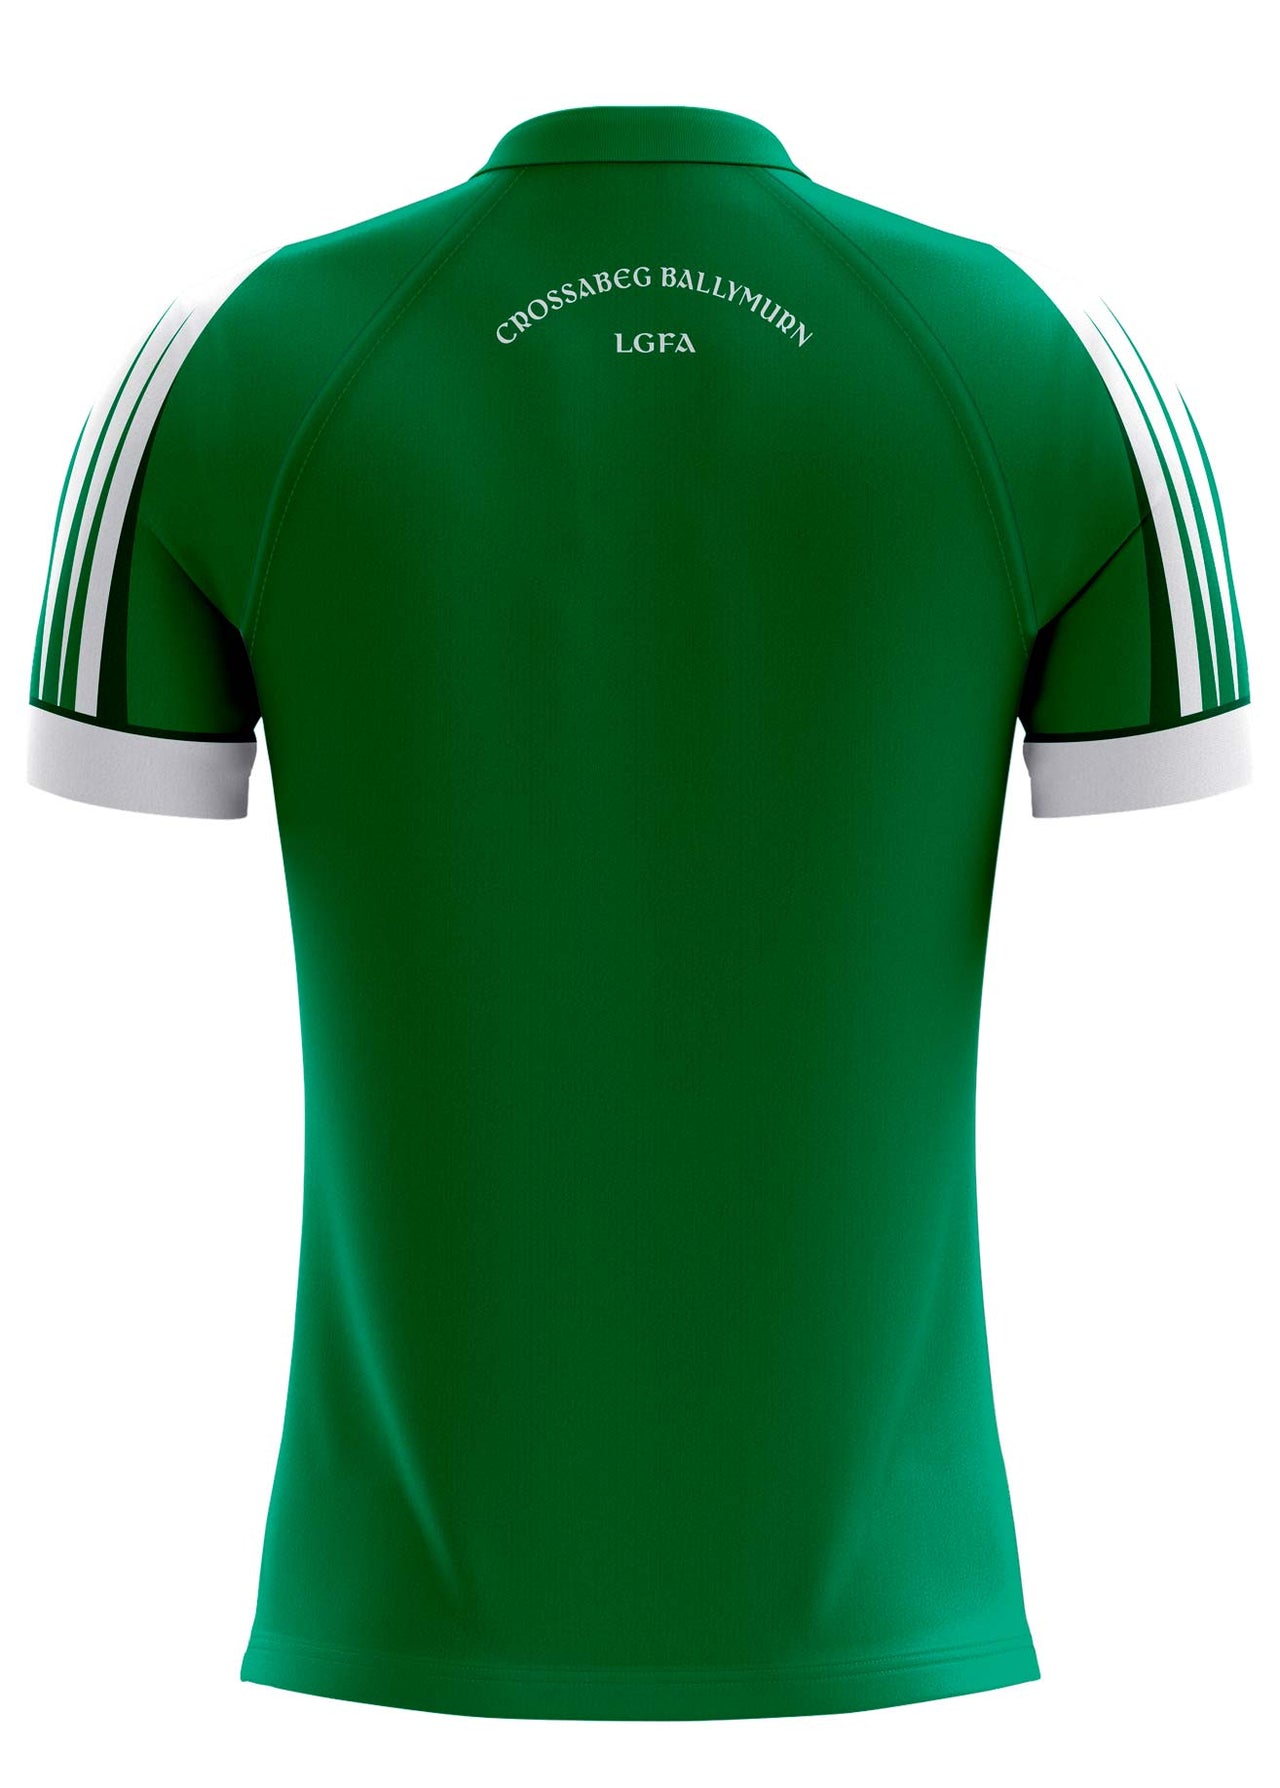 Crossabeg Ballymurn LGFC Home Jersey Player Fit Adult